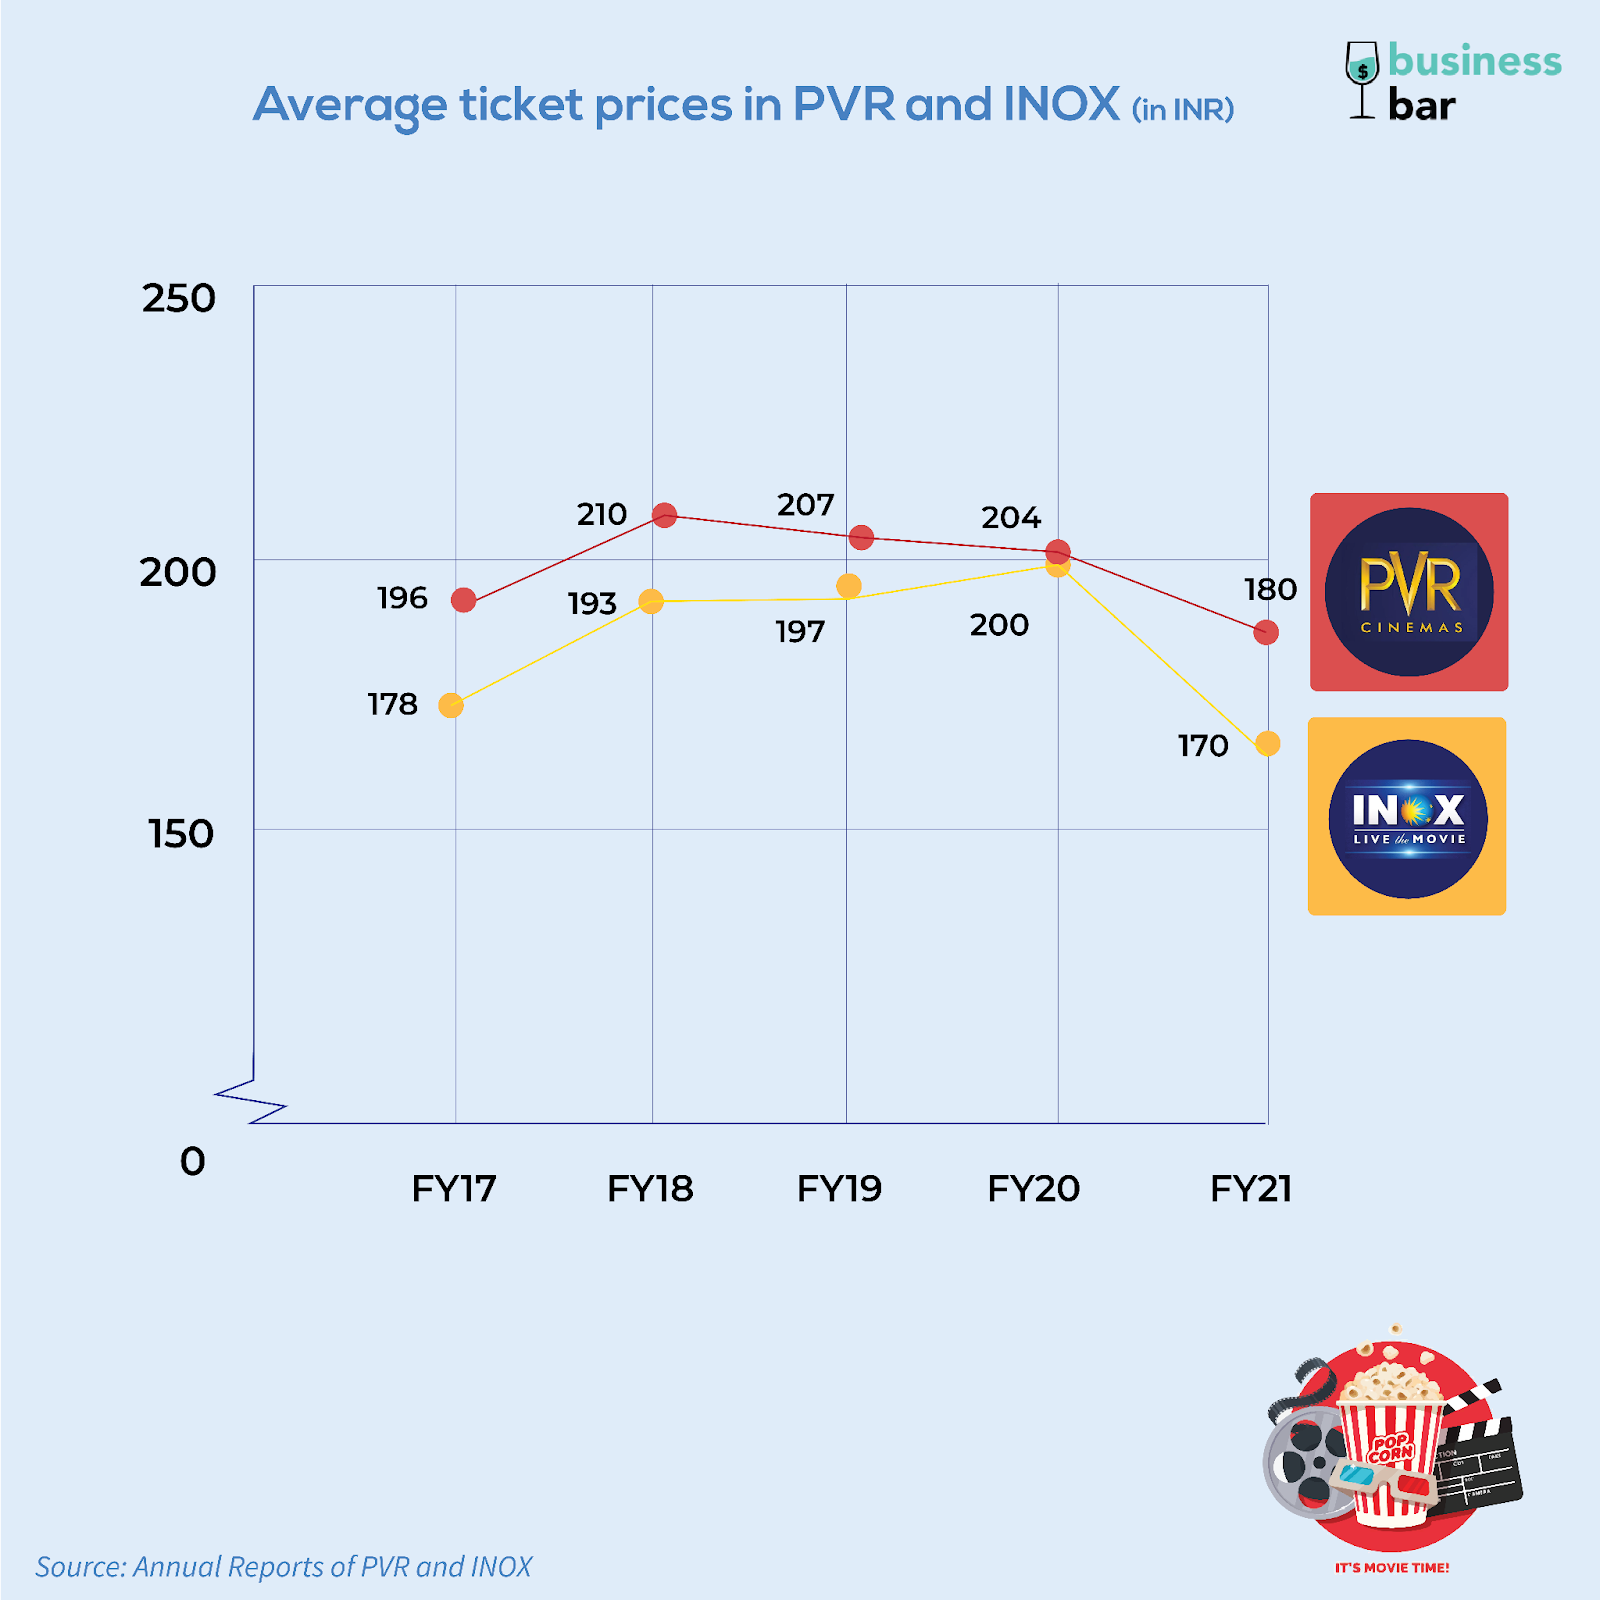 Average ticket prices at PVR and INOX